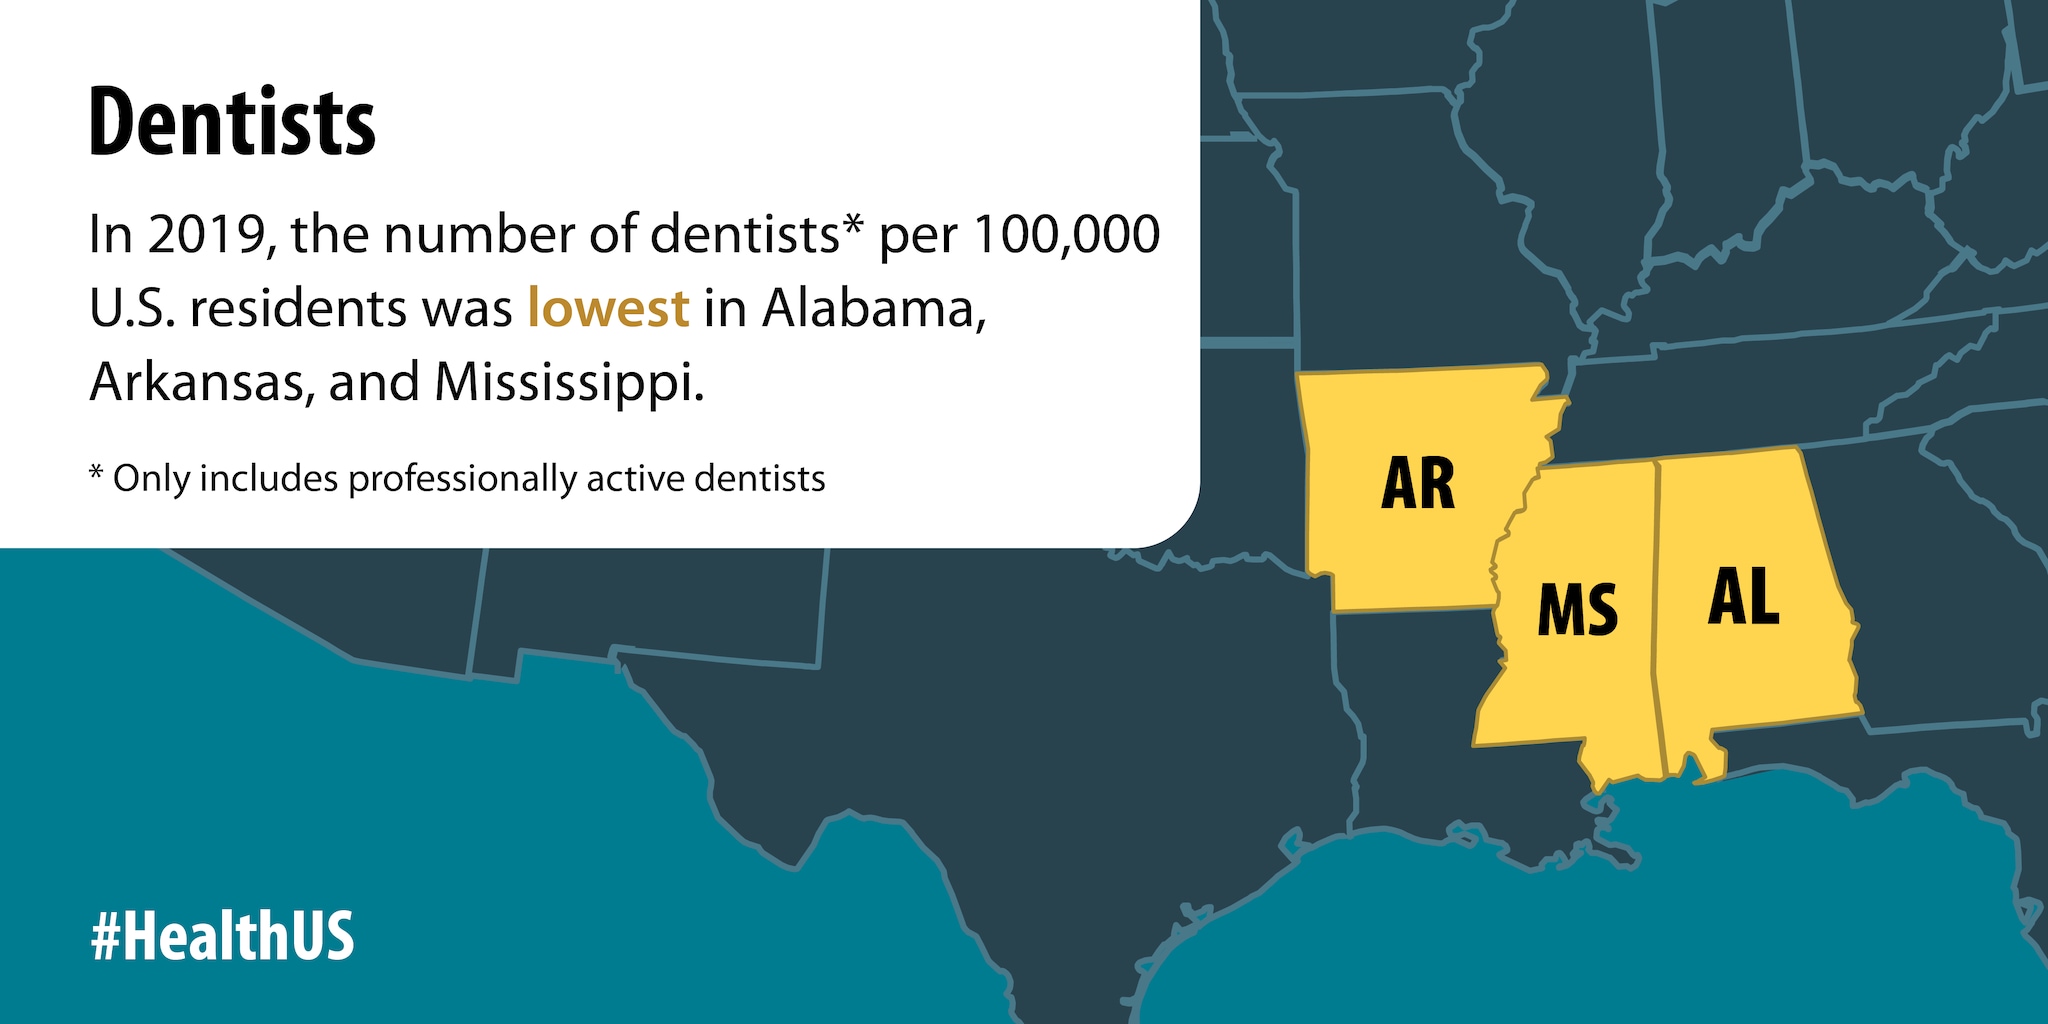 In 2019, the number of dentists per 100,000 U.S. residents was lowest in Alabama, Arkansas, and Mississippi.